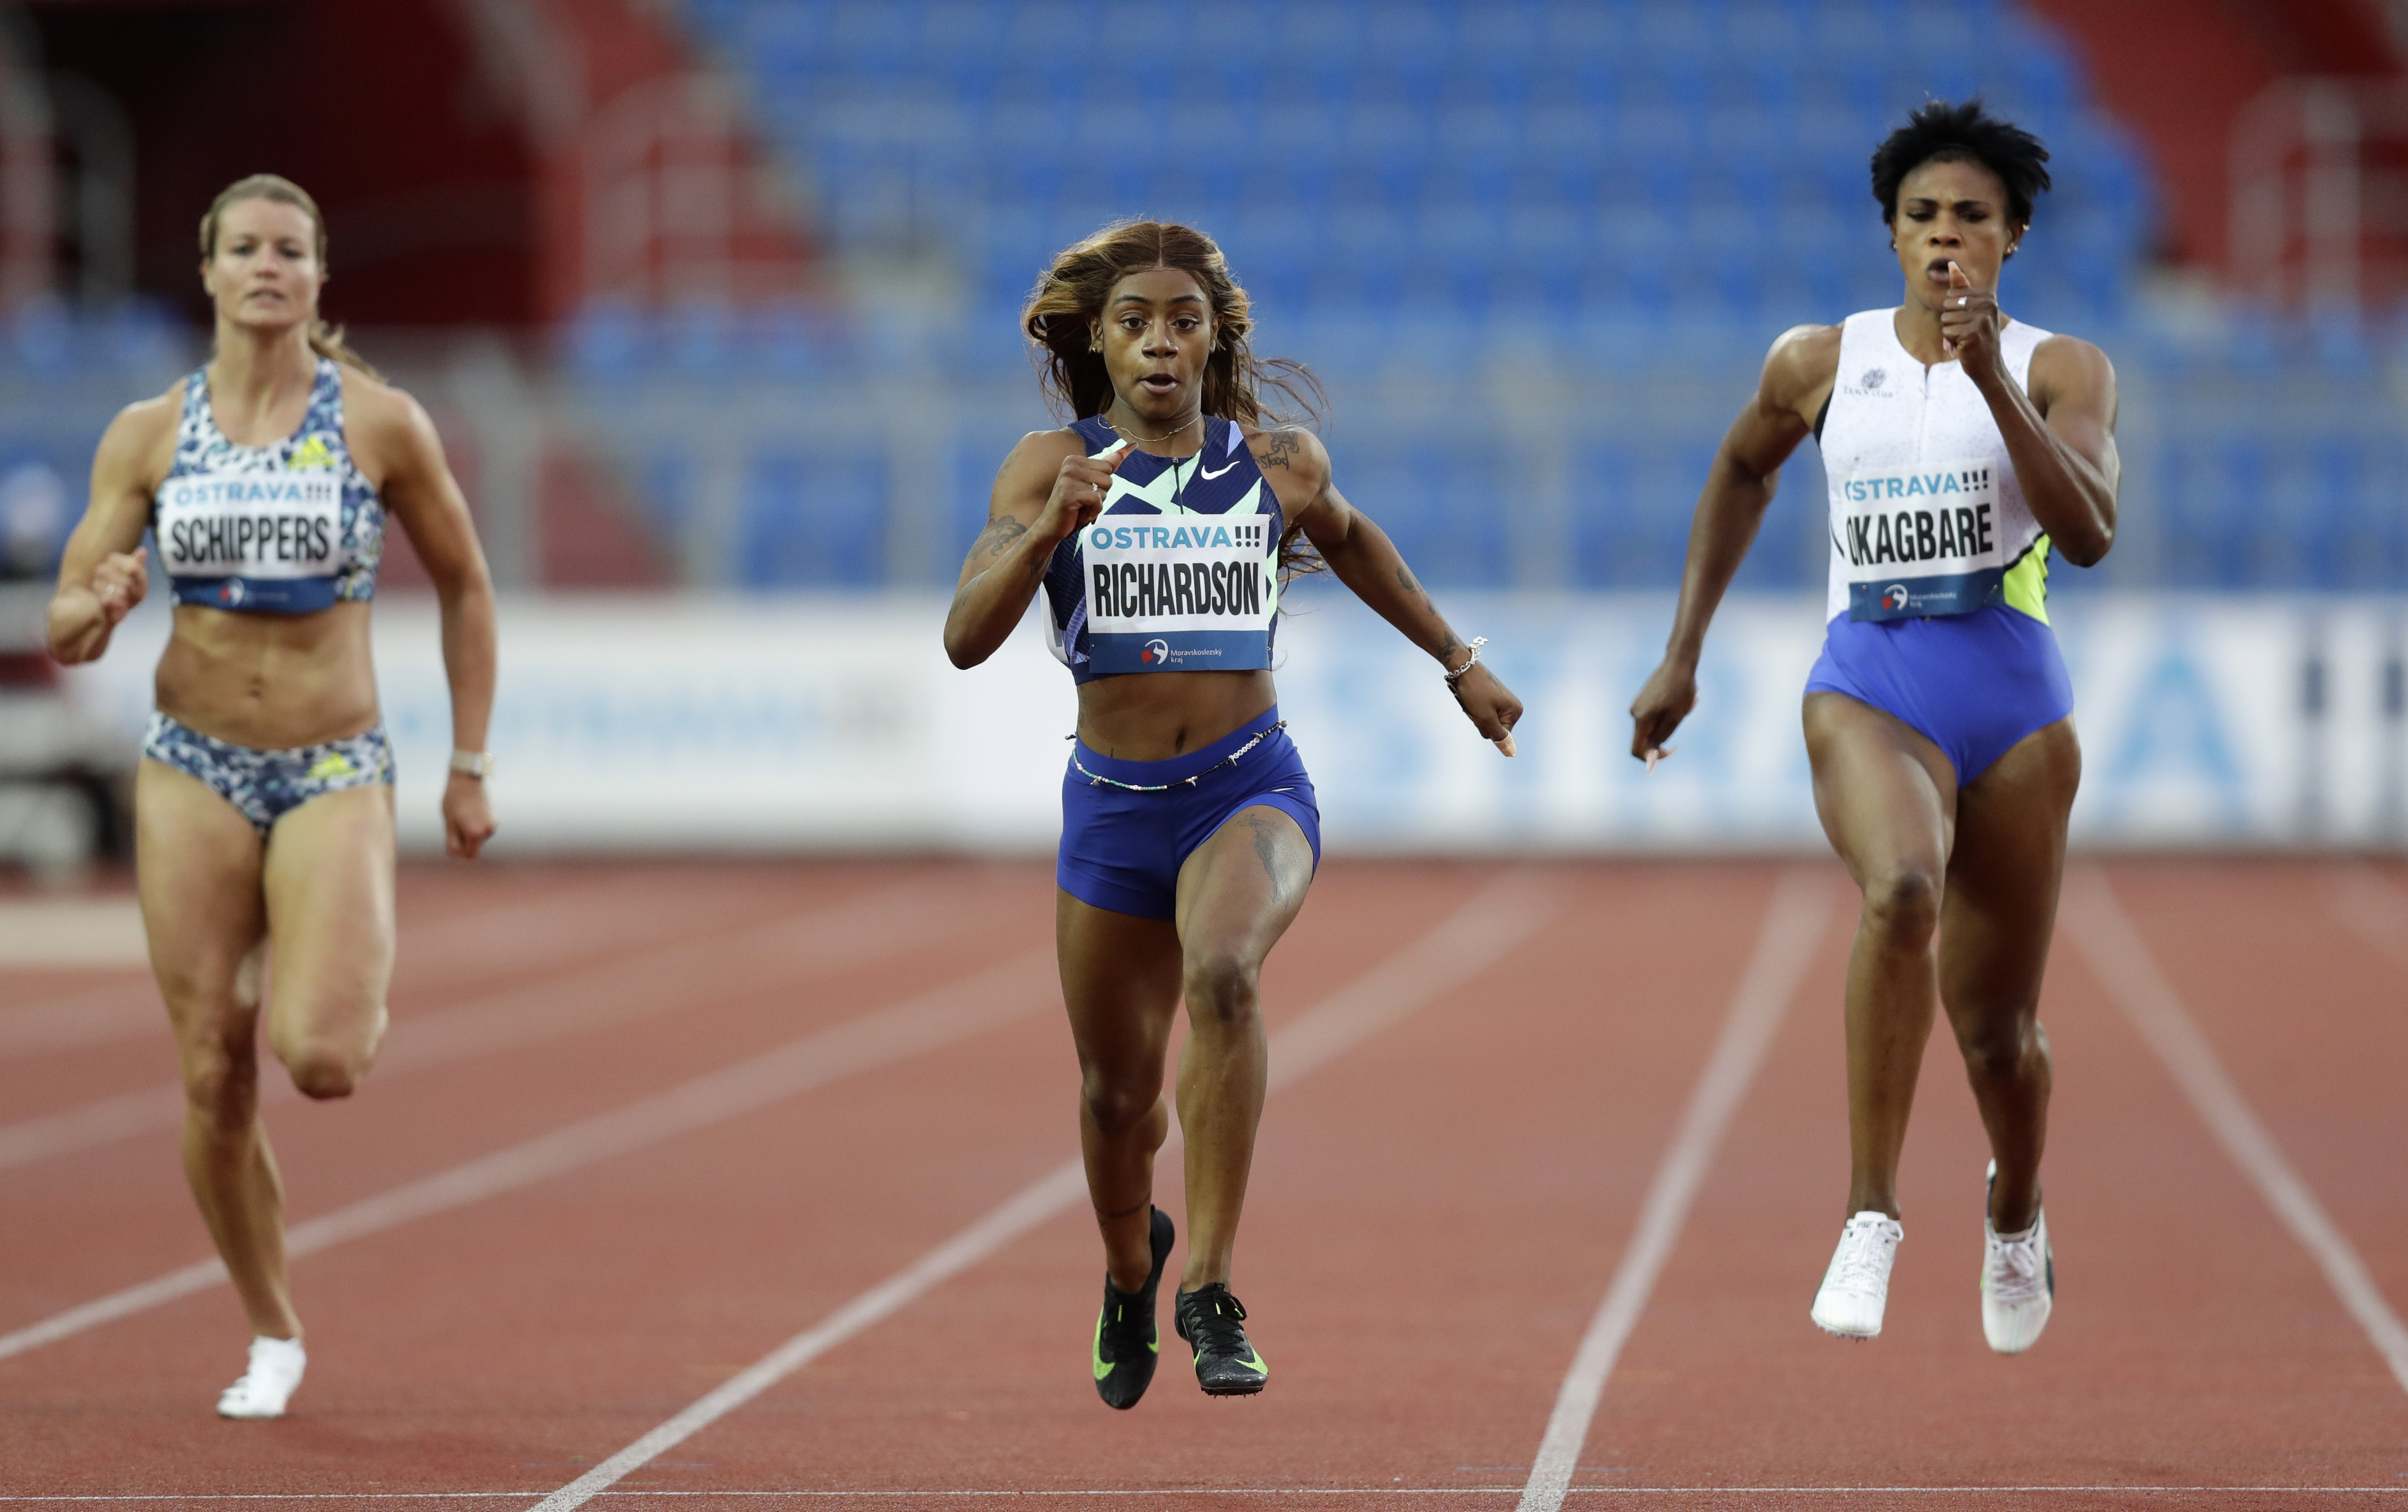 Sha’Carri Richardson reveals personal trauma, but remains mum on why she is not running